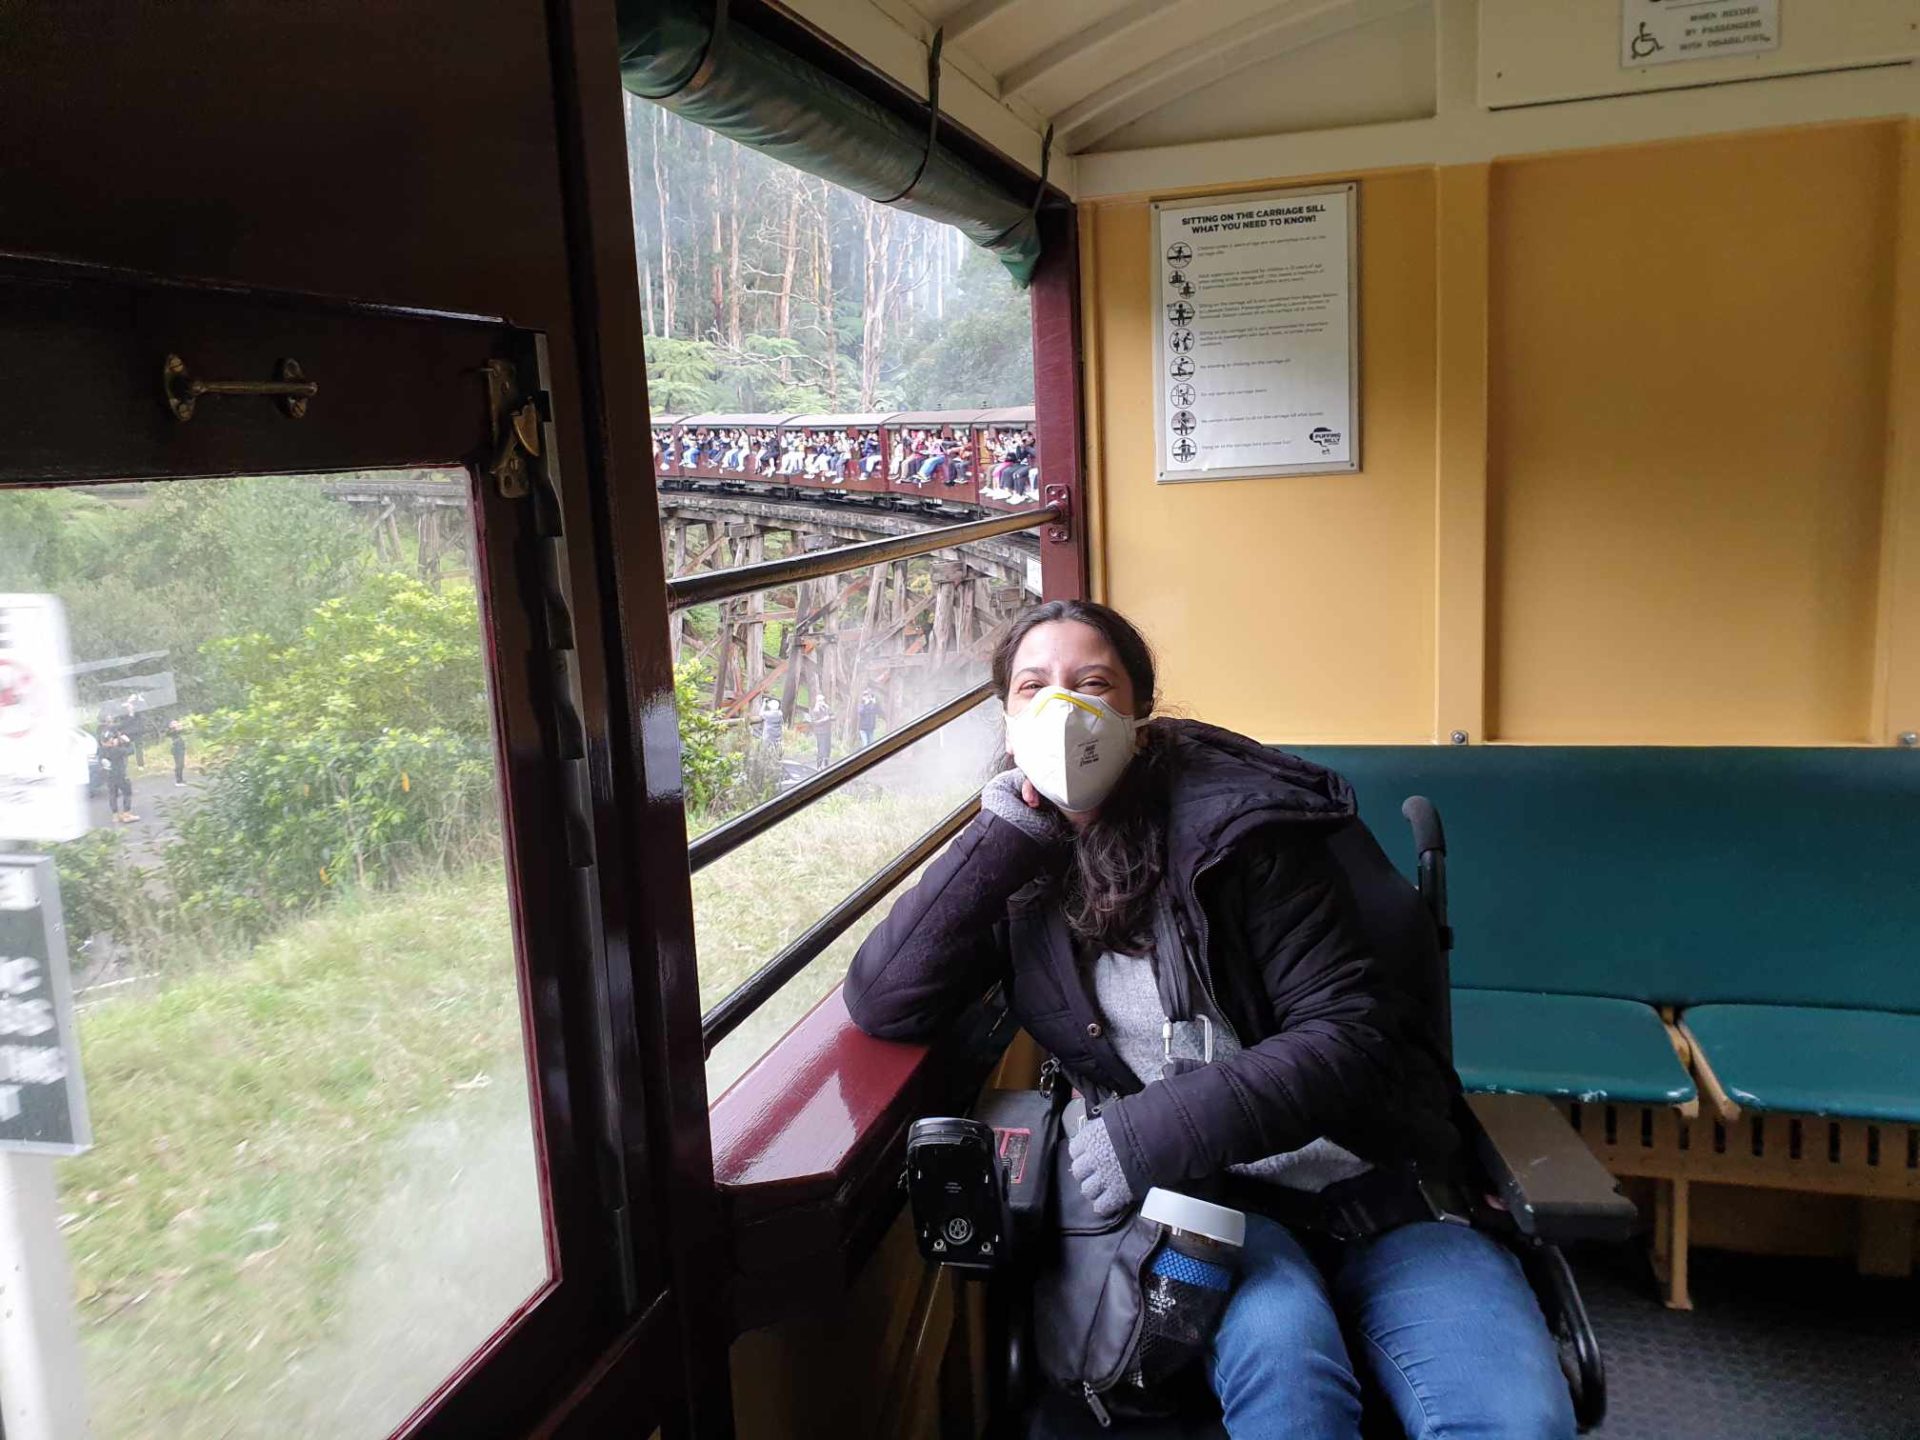 Young woman in a motorised wheelchair sits in one of Puffing Billy's accessible open side carriages. The train is travelling over a trestle bridge and green ferns can be seen outside. The young woman has warm clothes and a face mask, but you can see that she has a big smile on her face.